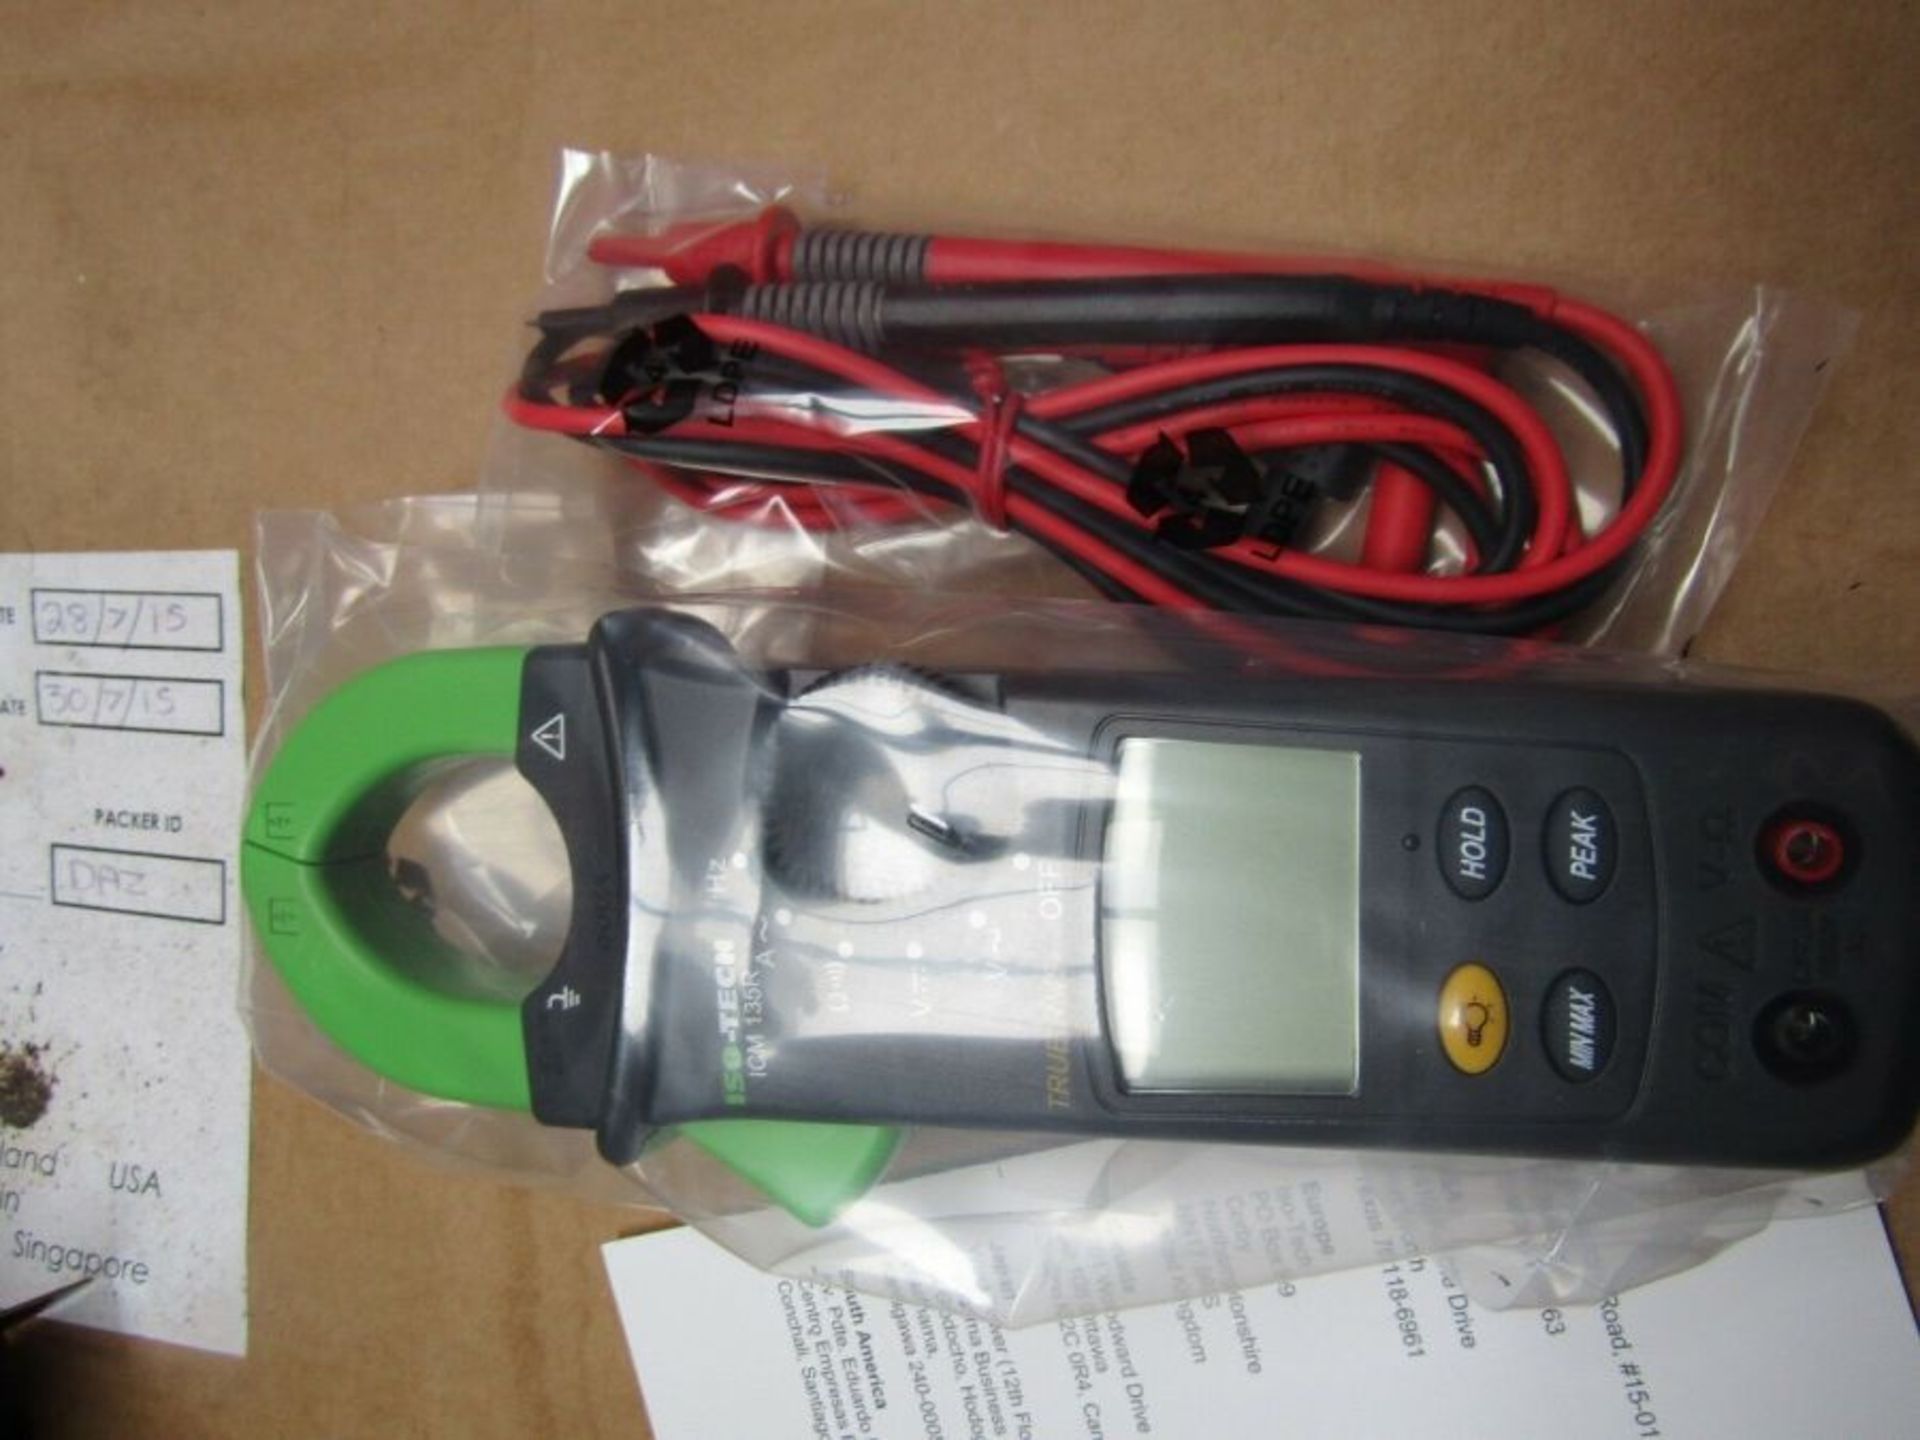 ISO-TECH ICM135R Clamp Meter, Max Current 600A ac CAT III 600V S4 6973957 - Image 3 of 4